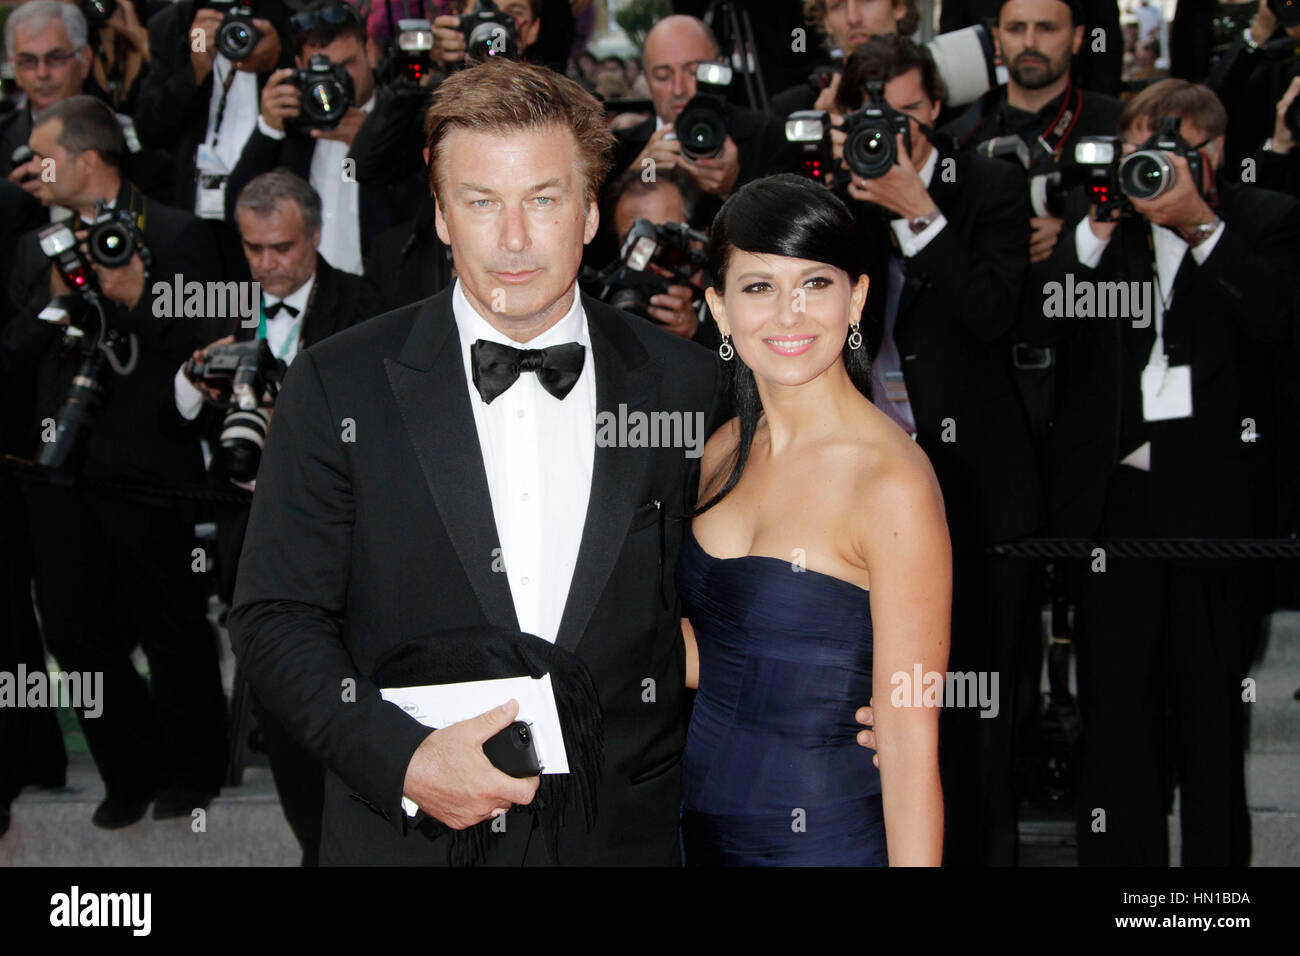 Alec Baldwin and Hilaria Thomas arrive at the premiere for the film, 'Mud' at the 65th Cannes Film Festival in Cannes, France on May 26, 2012. Photo by Francis Specker Stock Photo